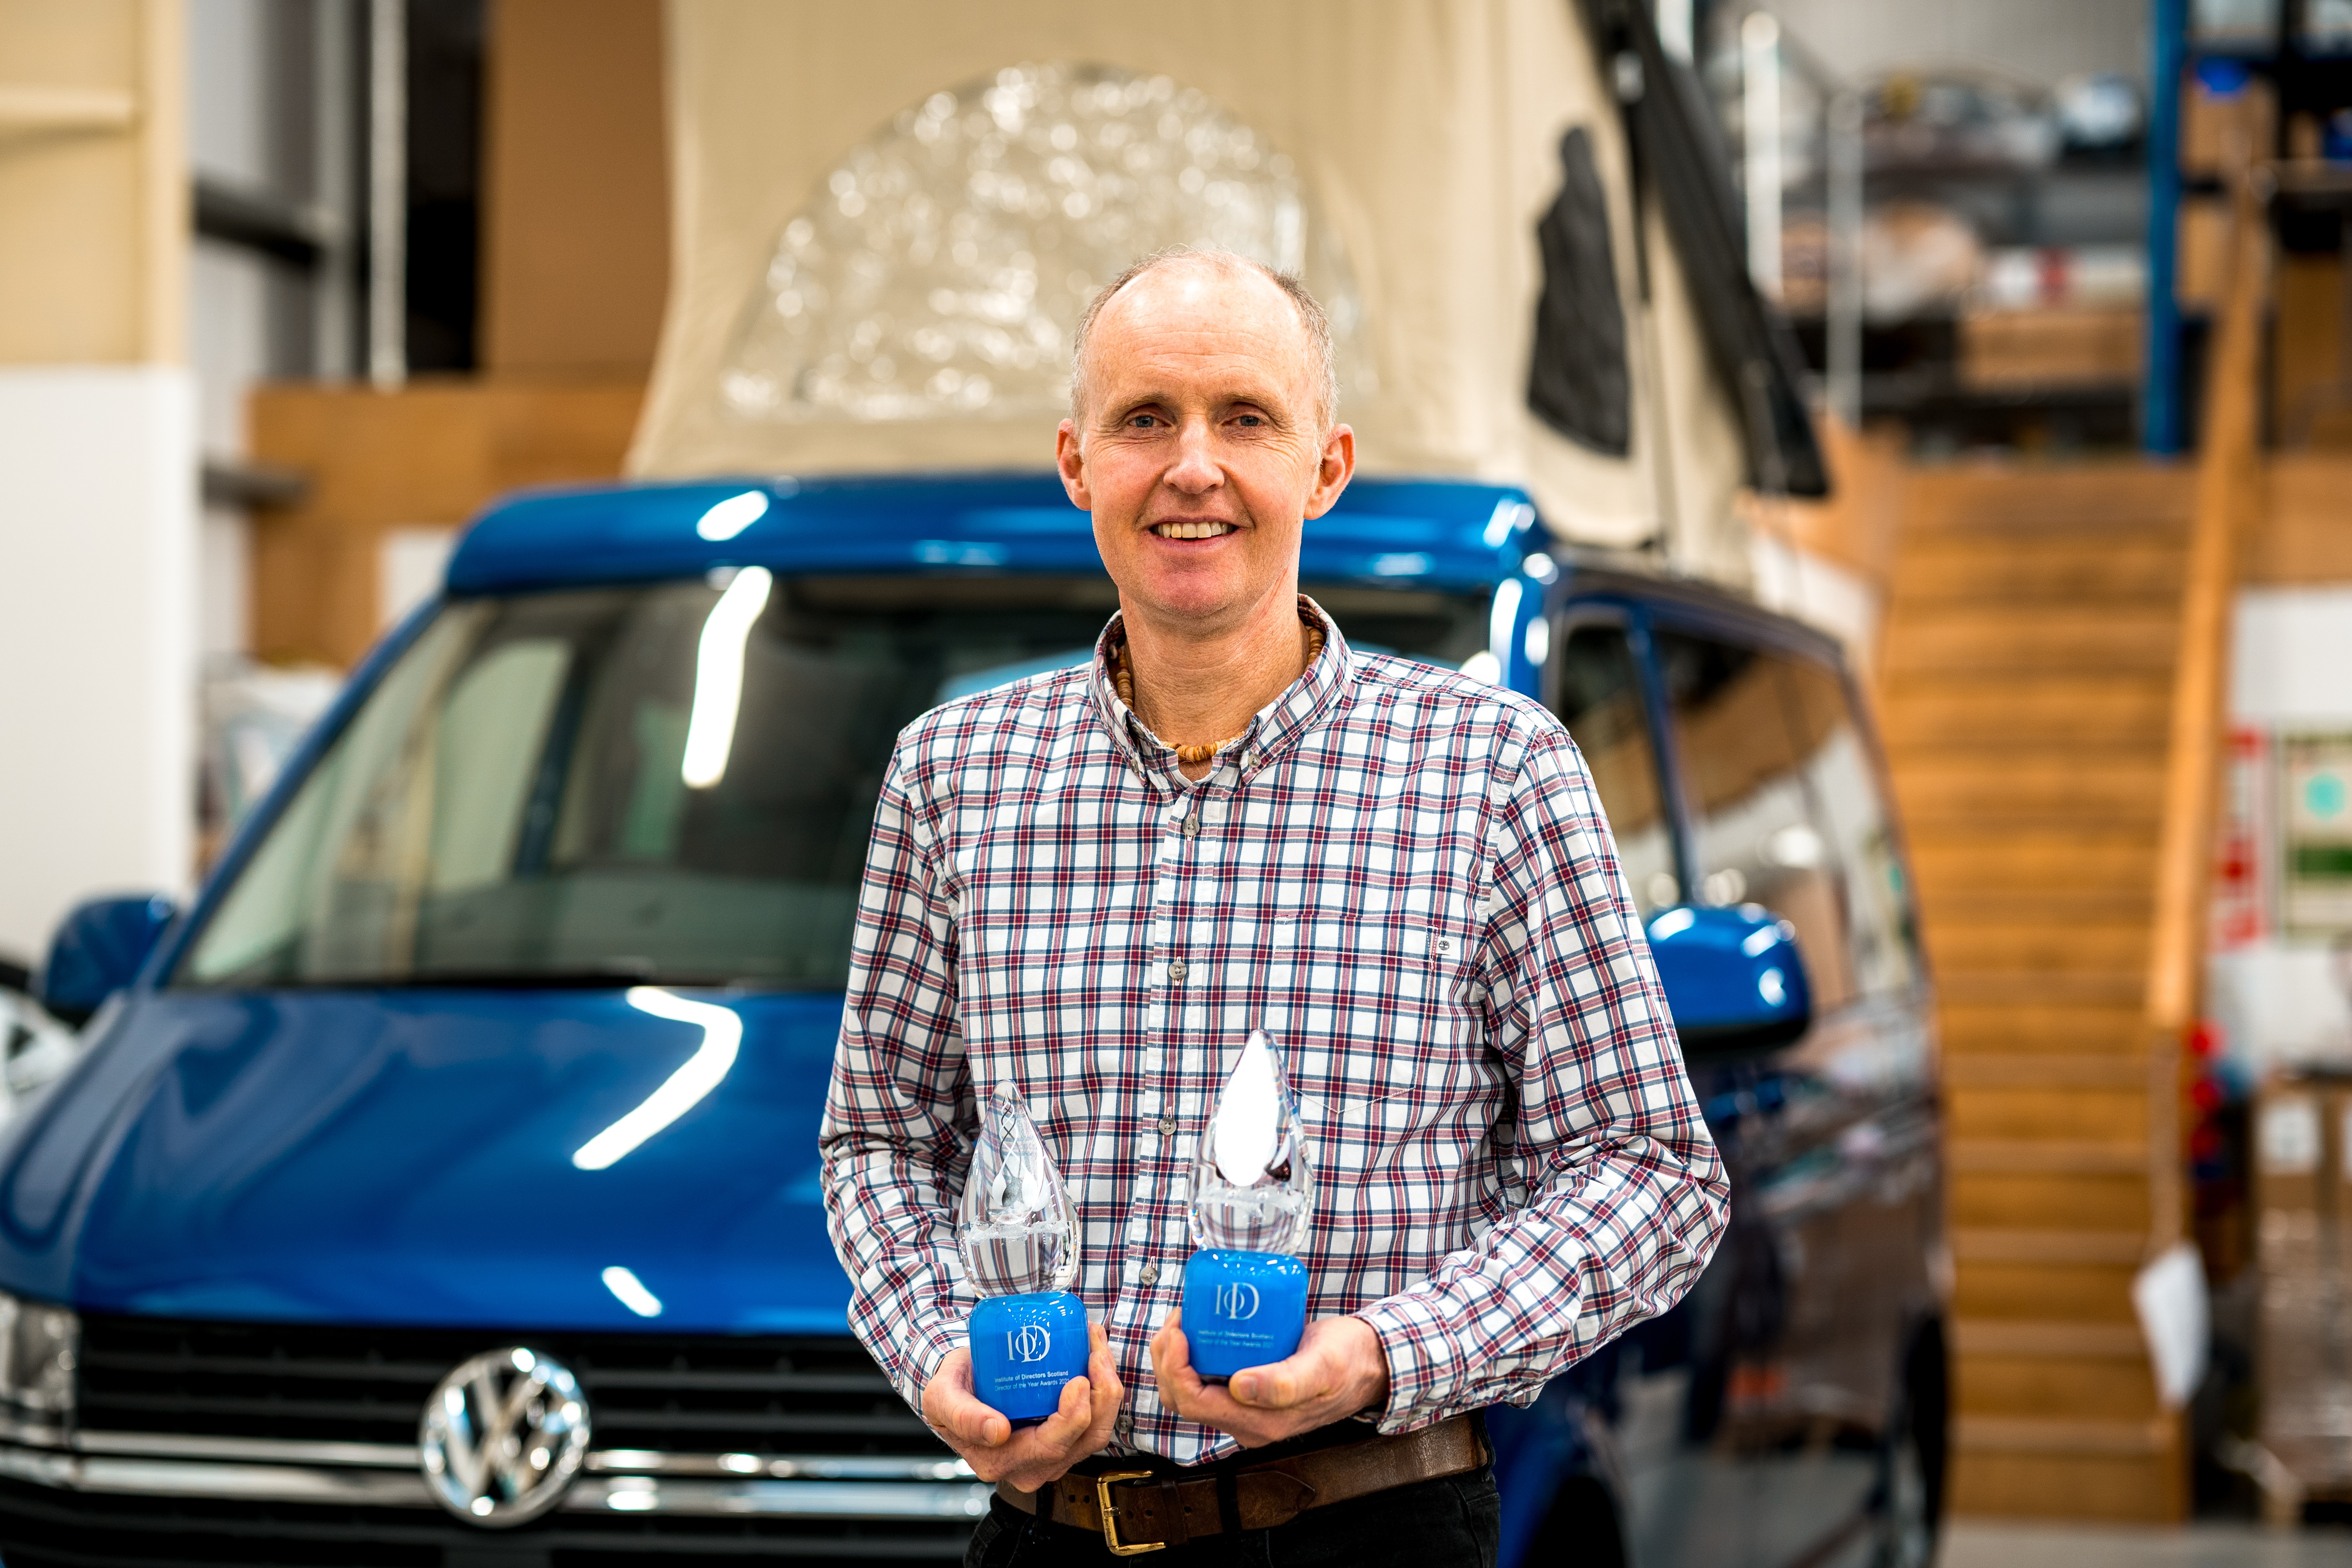 East Lothian business founder awarded National Director of the Year by IoD